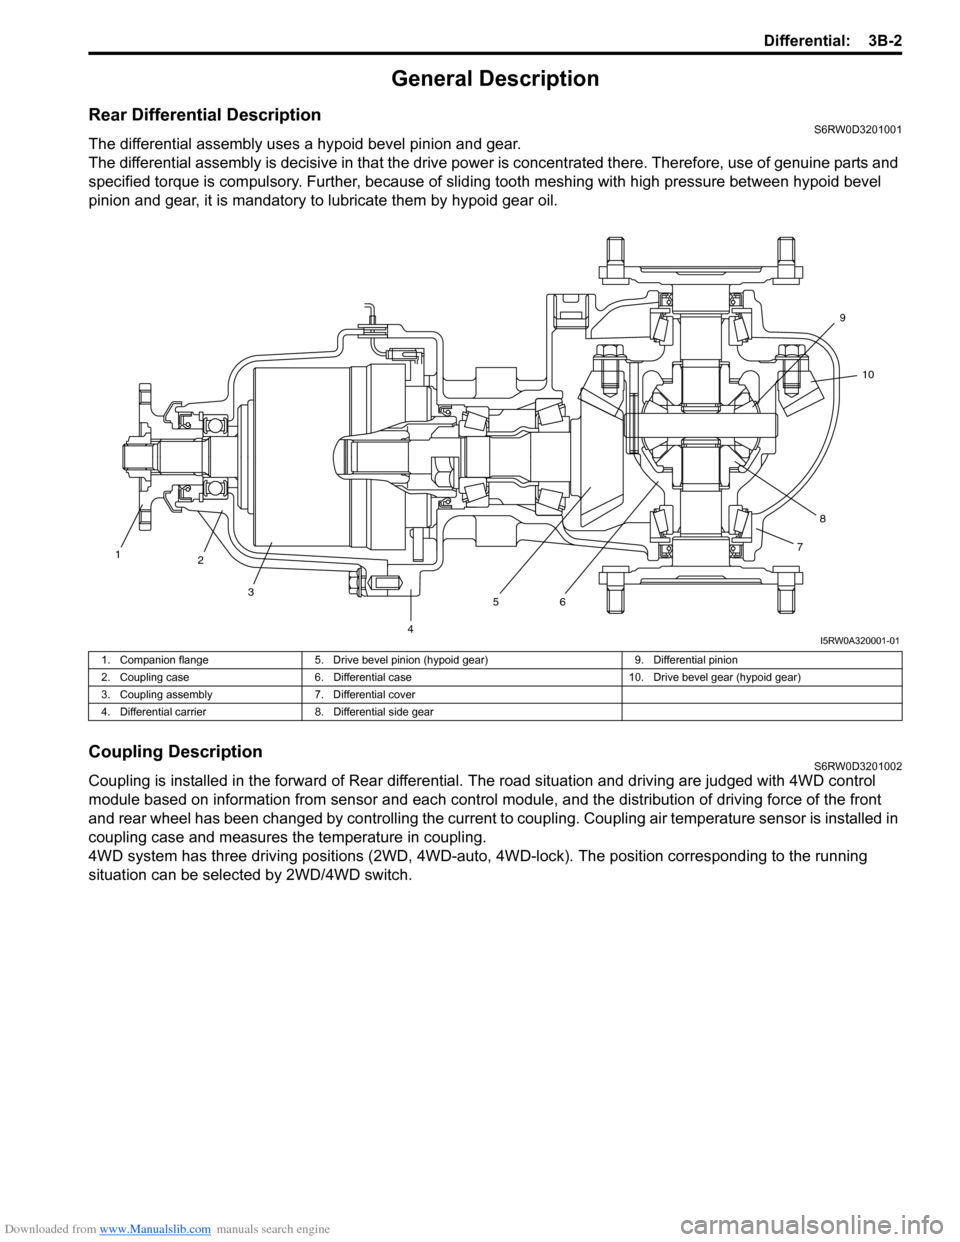 SUZUKI SX4 2006 1.G Service Owners Guide Downloaded from www.Manualslib.com manuals search engine Differential: 3B-2
General Description
Rear Differential DescriptionS6RW0D3201001
The differential assembly uses a hypoid bevel pinion and gear